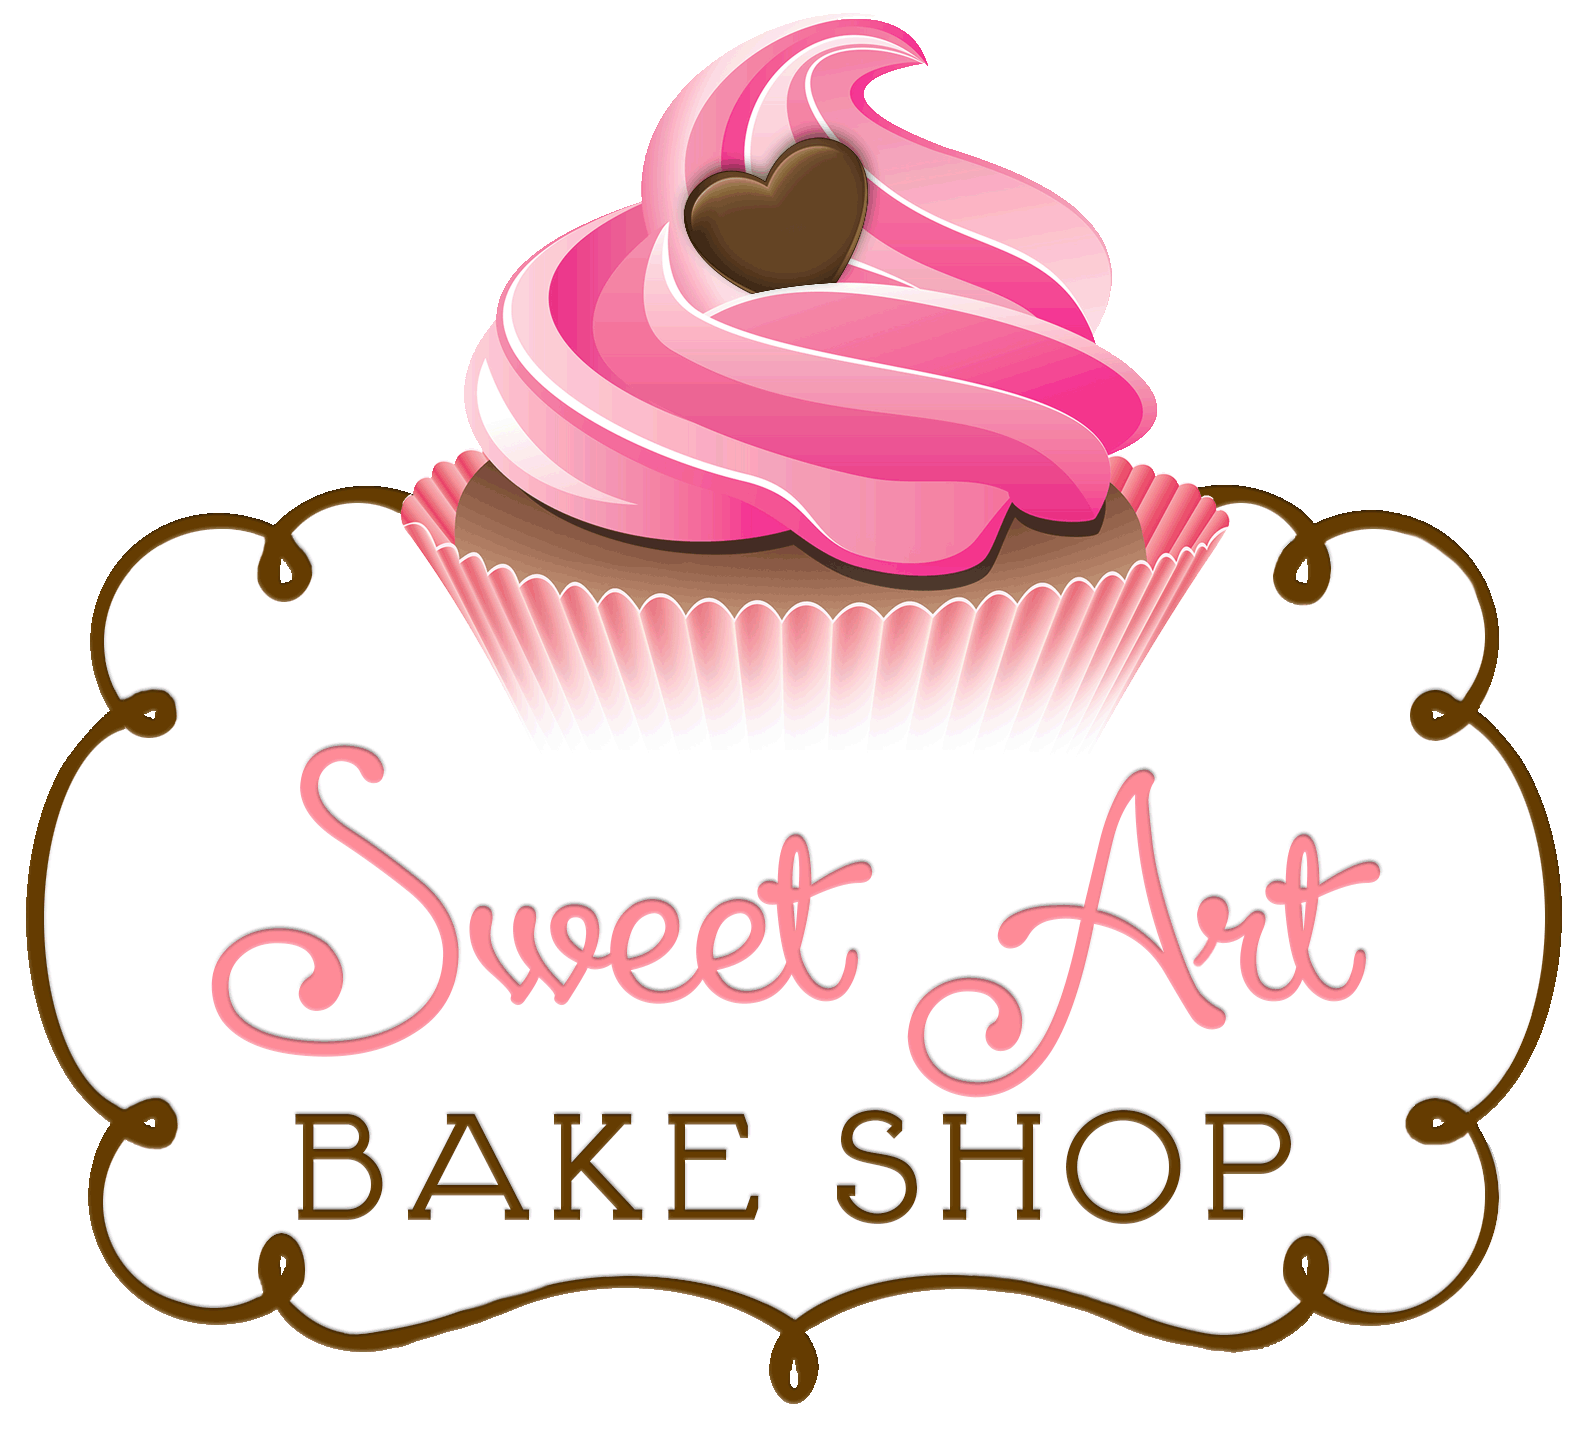 Kurt nething photography recommended. Desserts clipart baked sweet